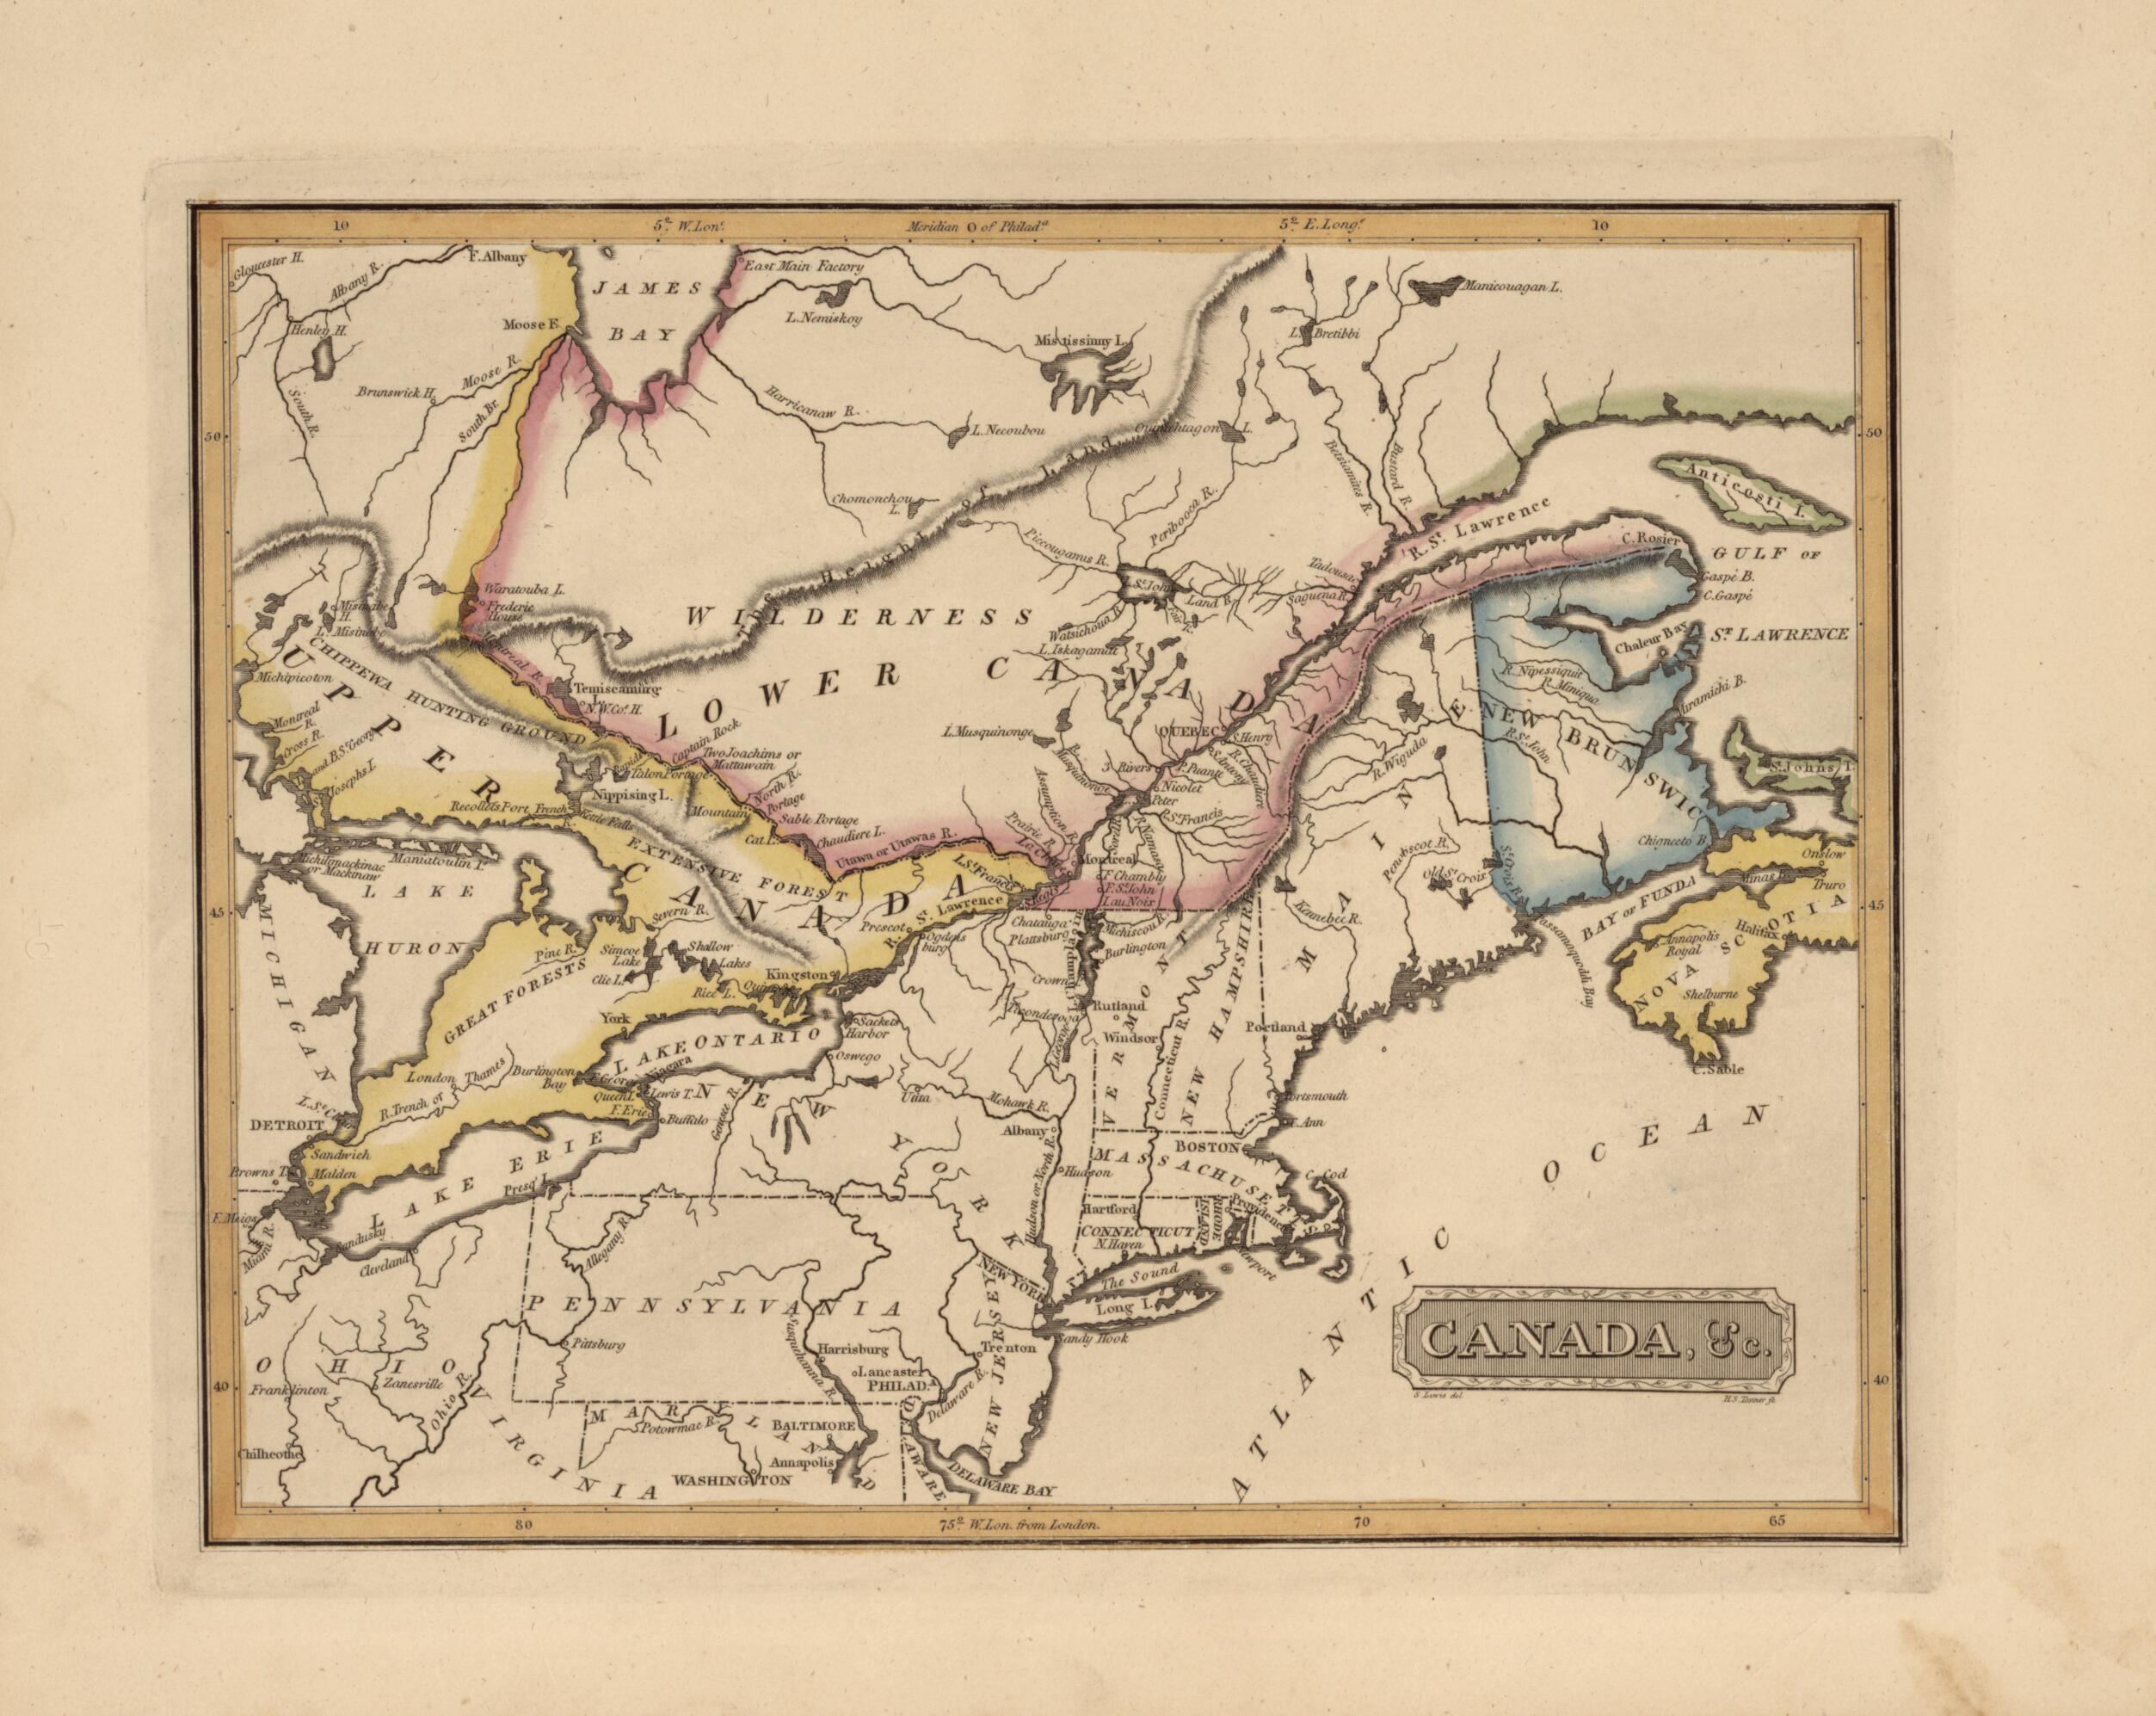 This old map of Canada from a New and Elegant General Atlas, Containing Maps of Each of the United States  from 1817 was created by Henry Schenck Tanner in 1817